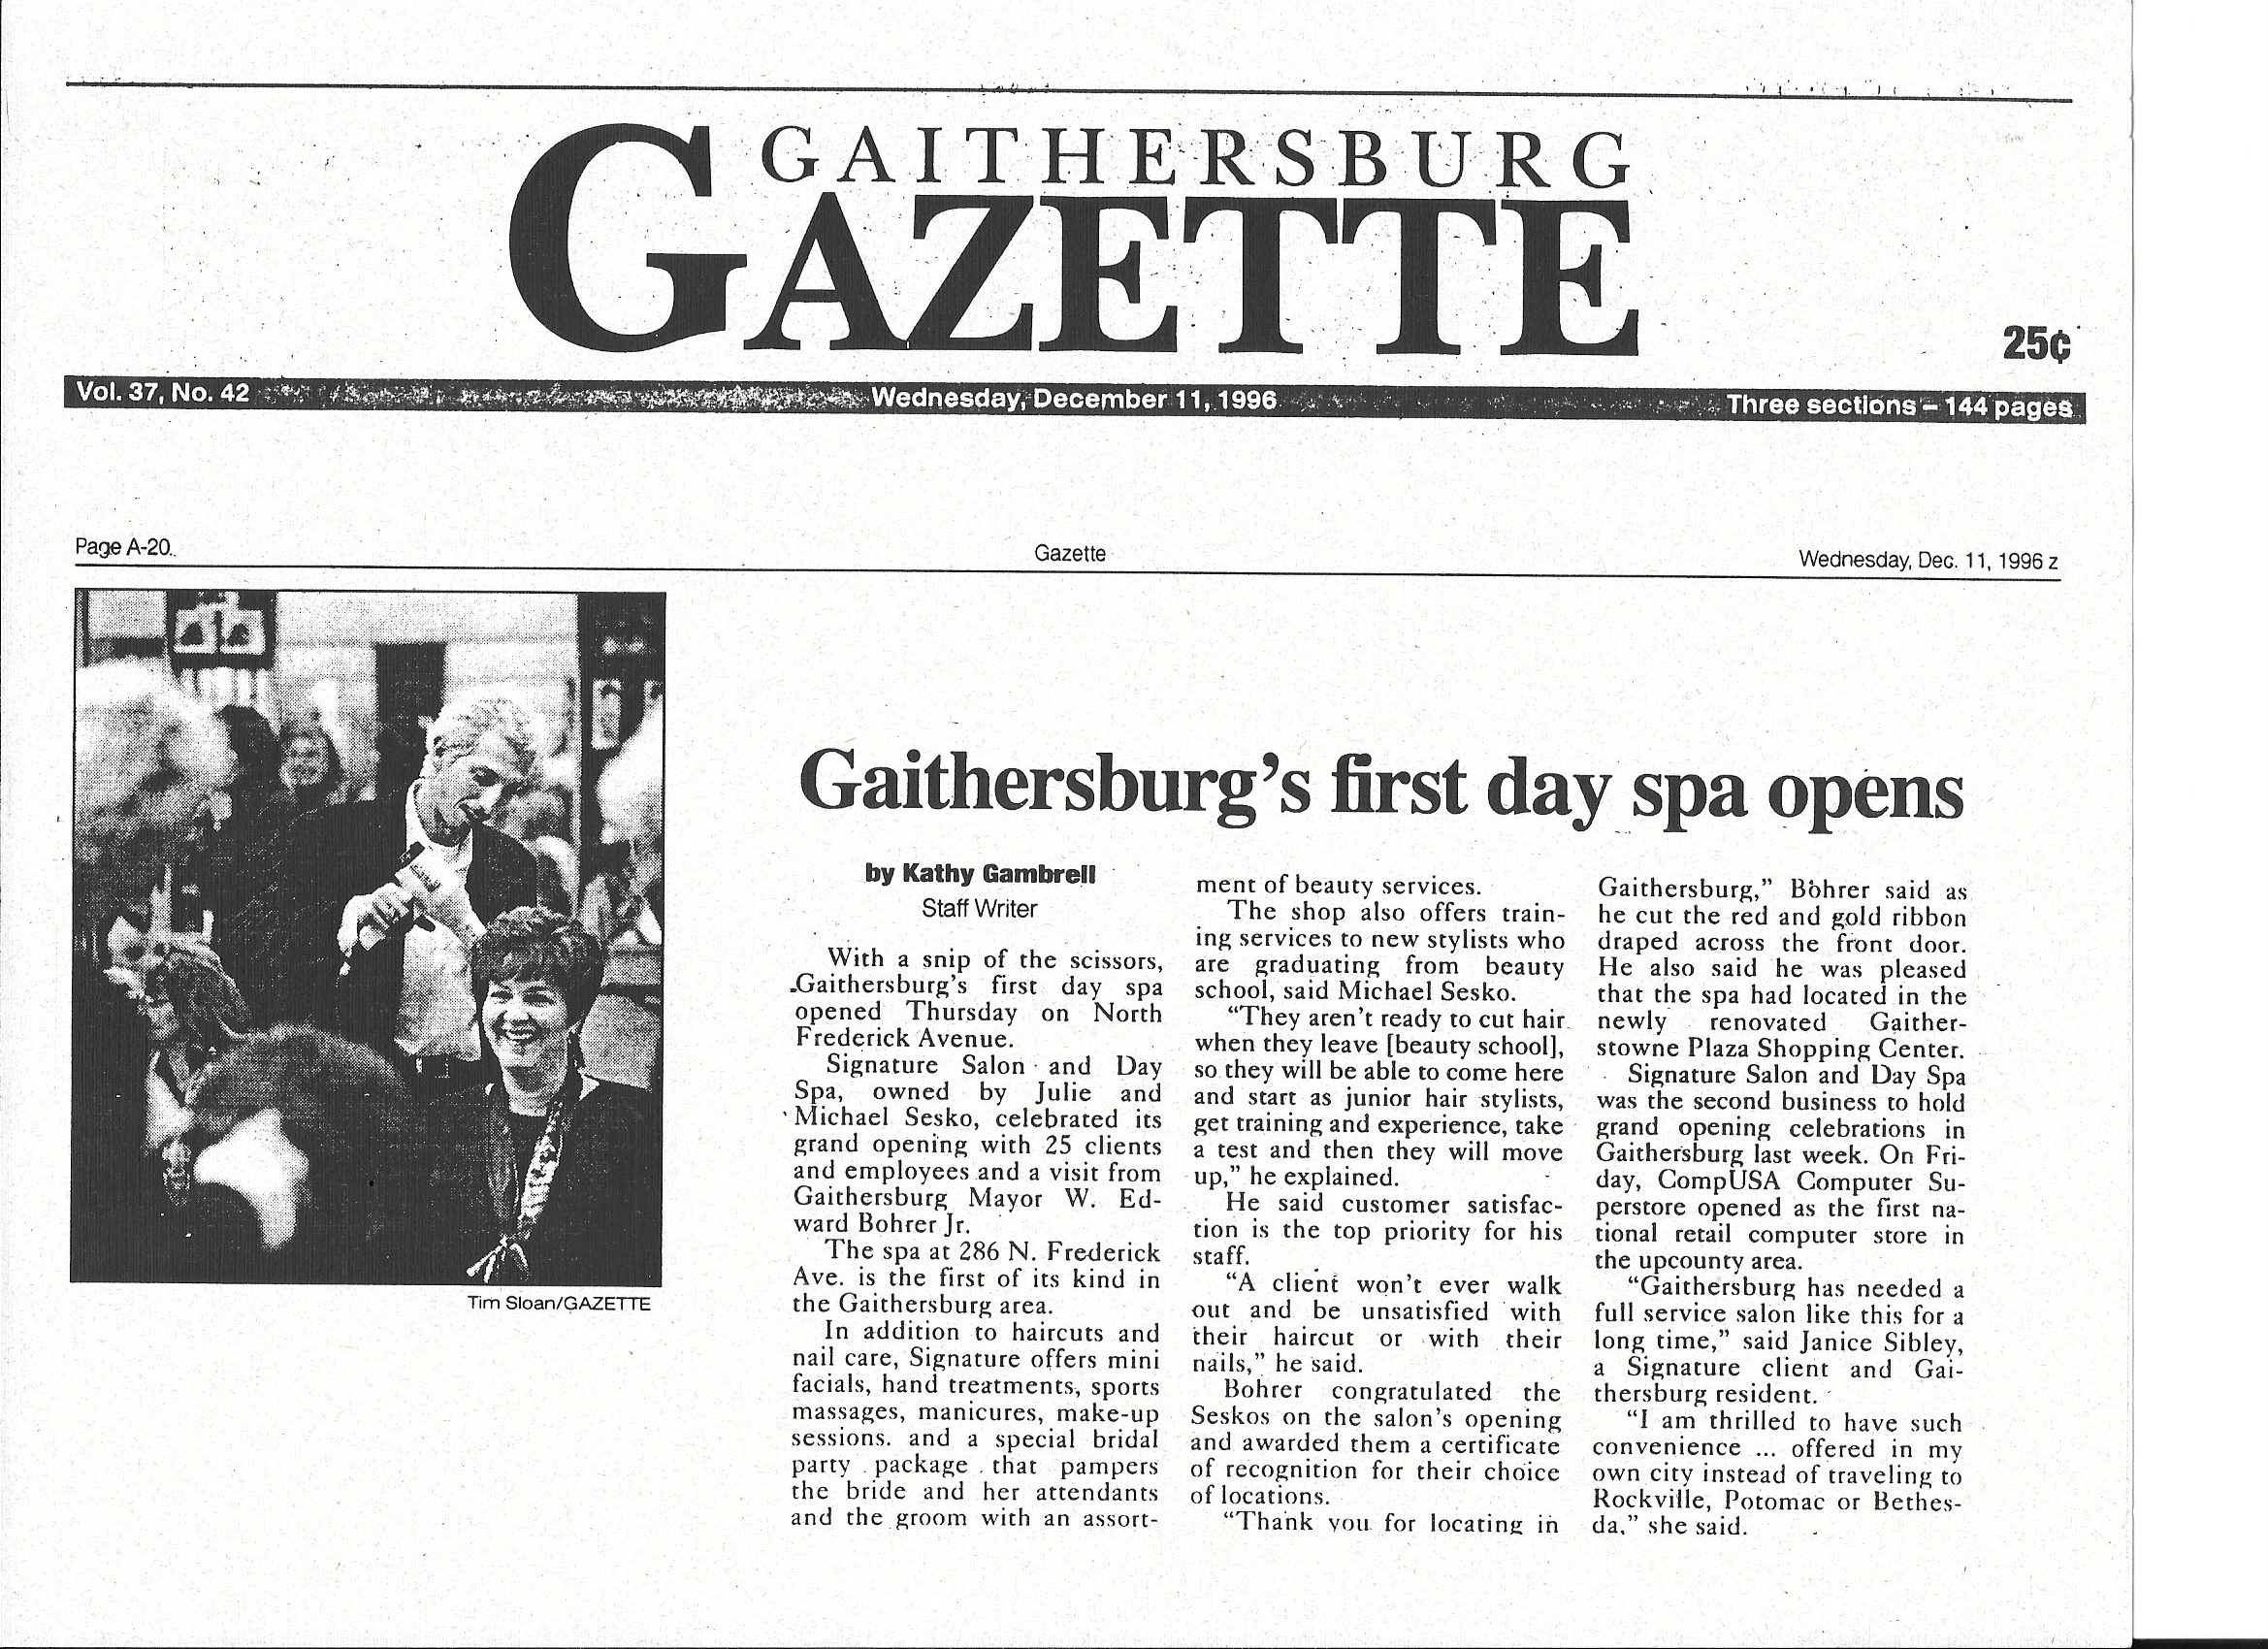 Newspaper about the openning of Gaithersburg's first day spa.